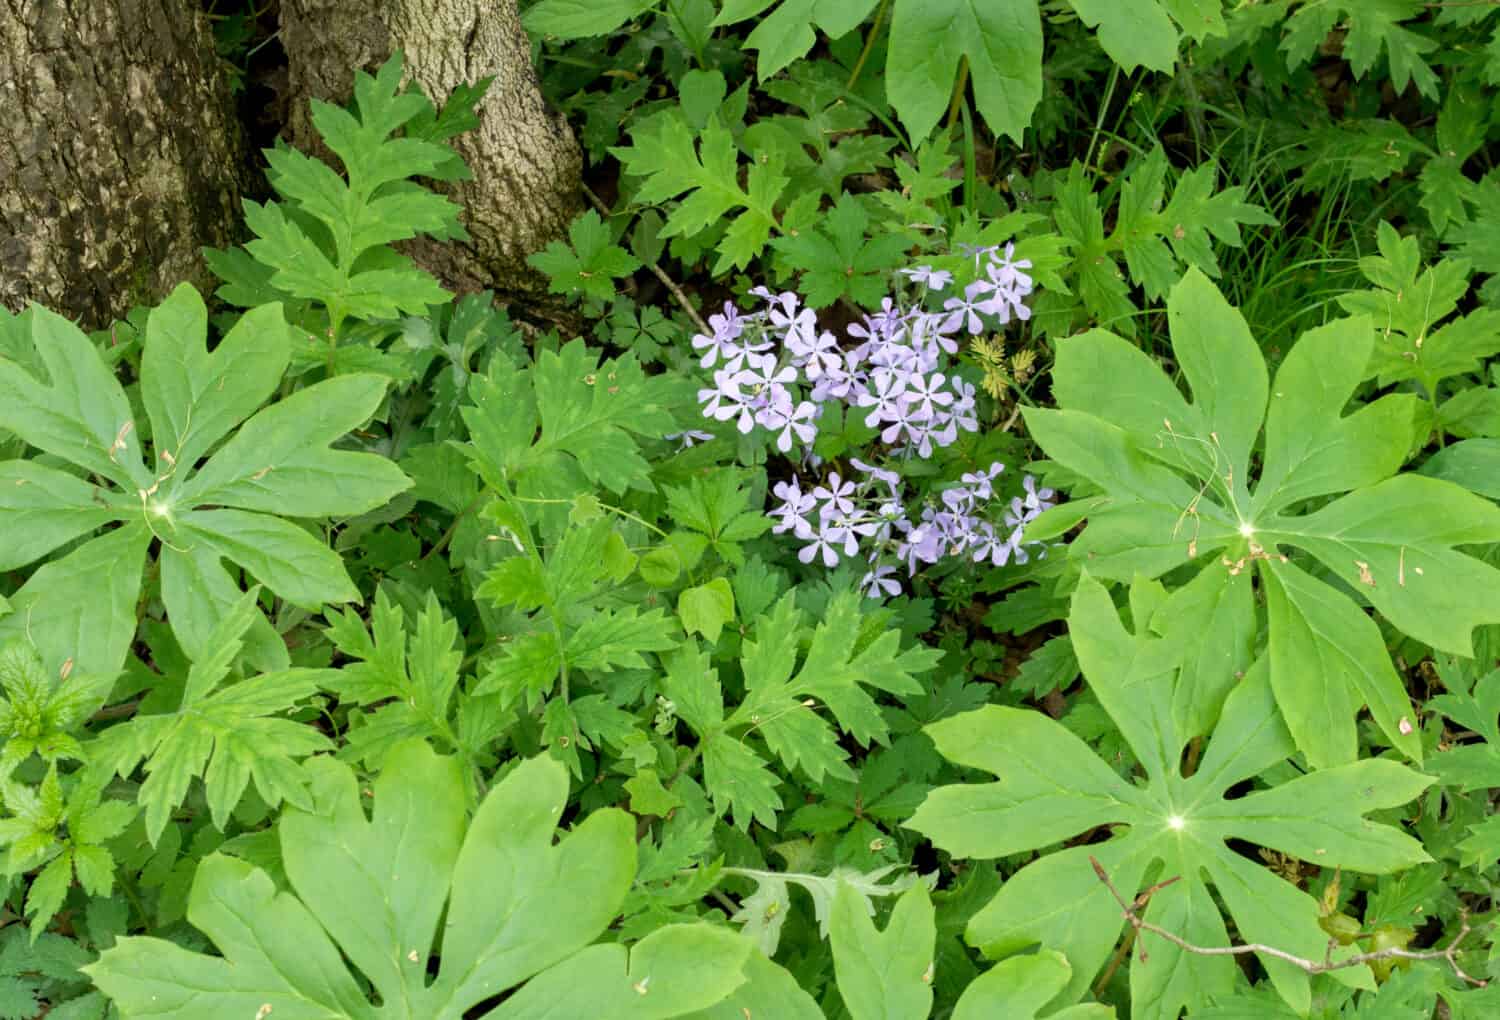 Purple phlox grow in early spring, among the bright green may apples in this shady spring woods